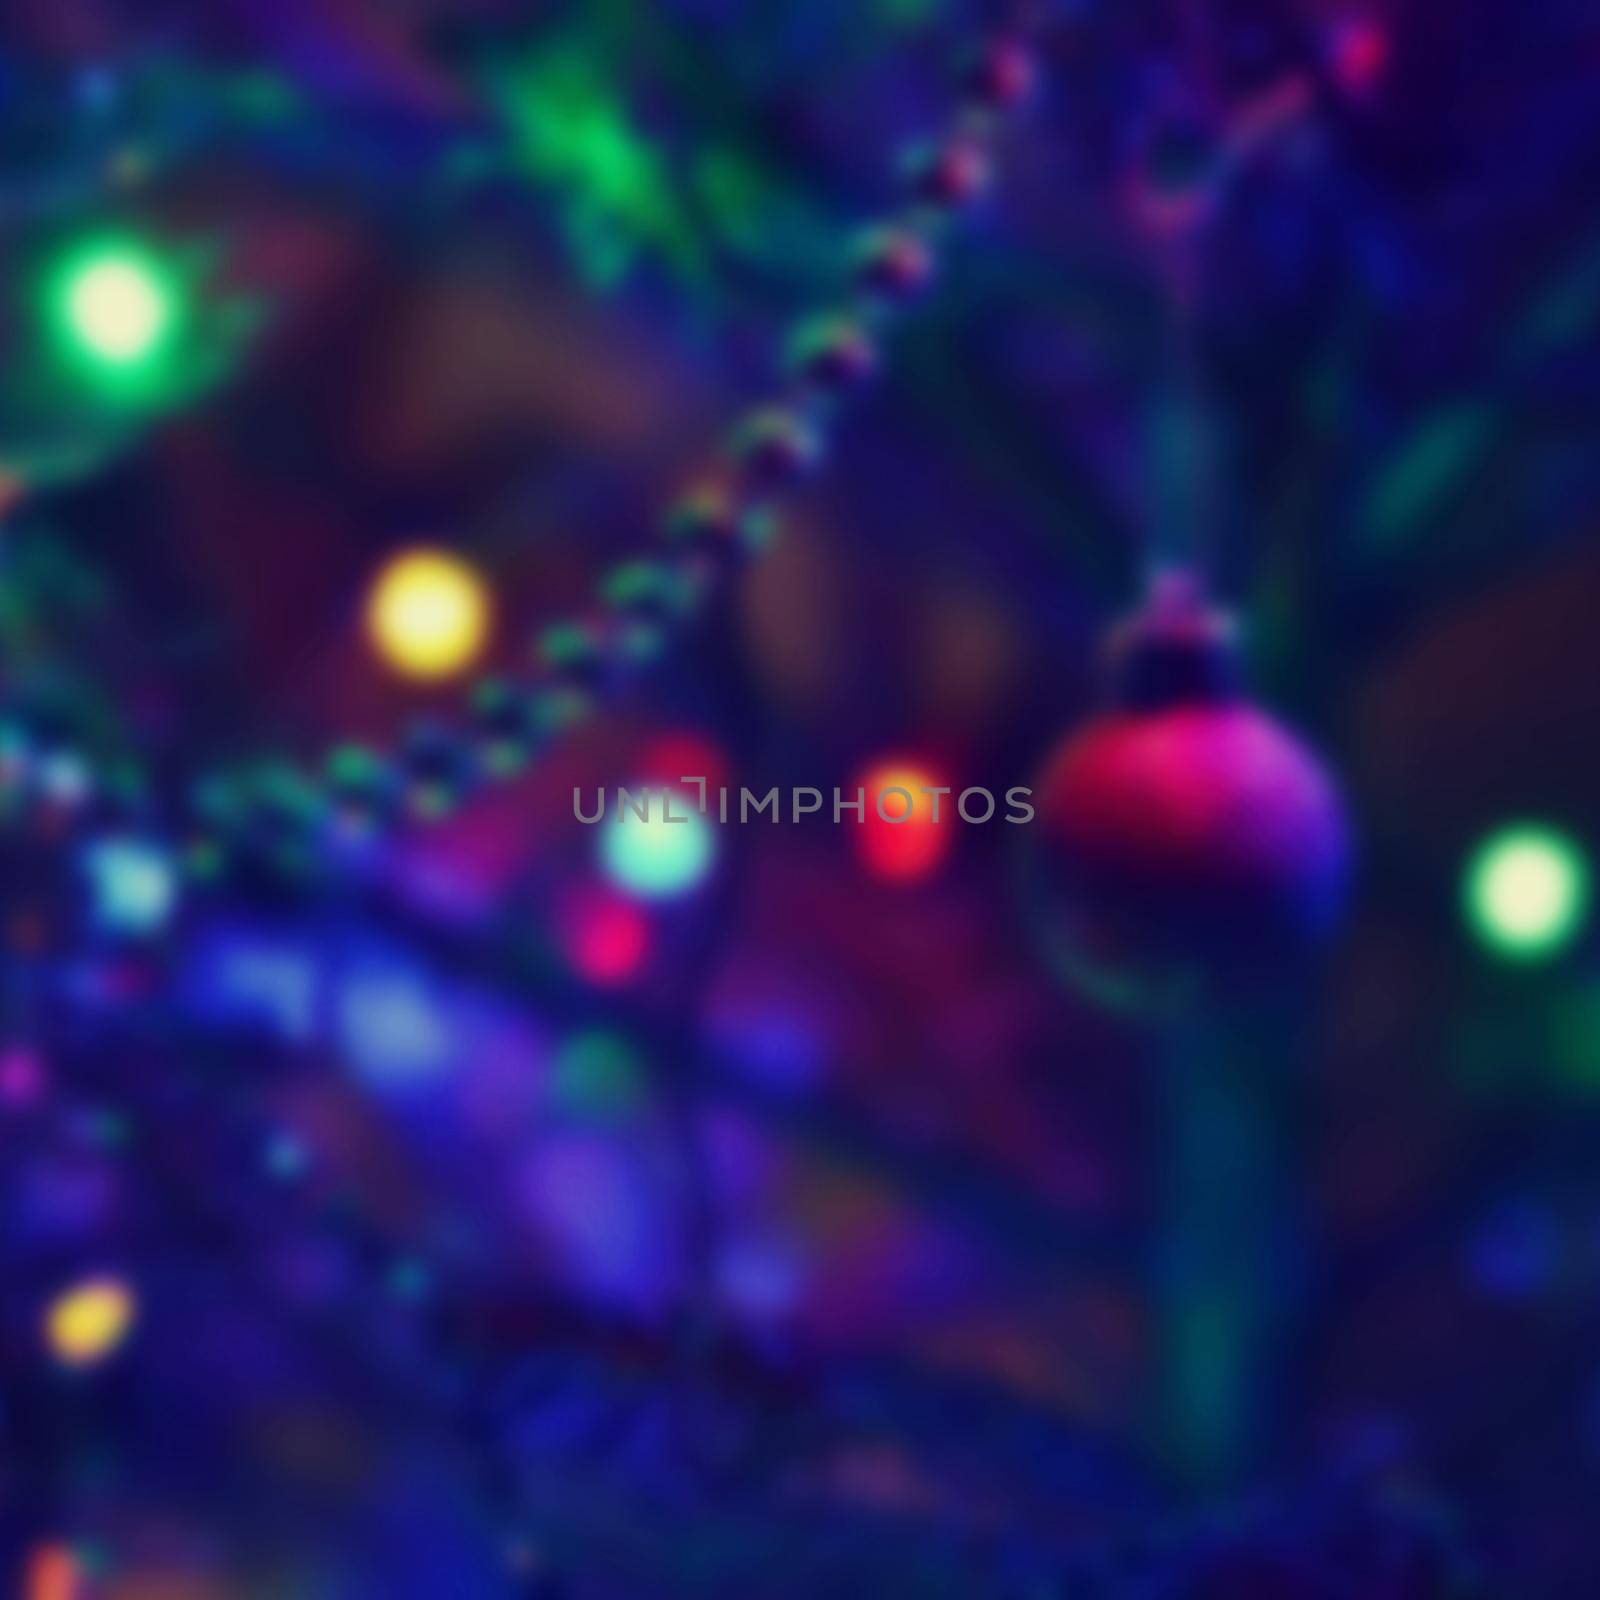 Blurred abstract xmas background, christmas texture from color lights on the Christmas tree. by Montypeter